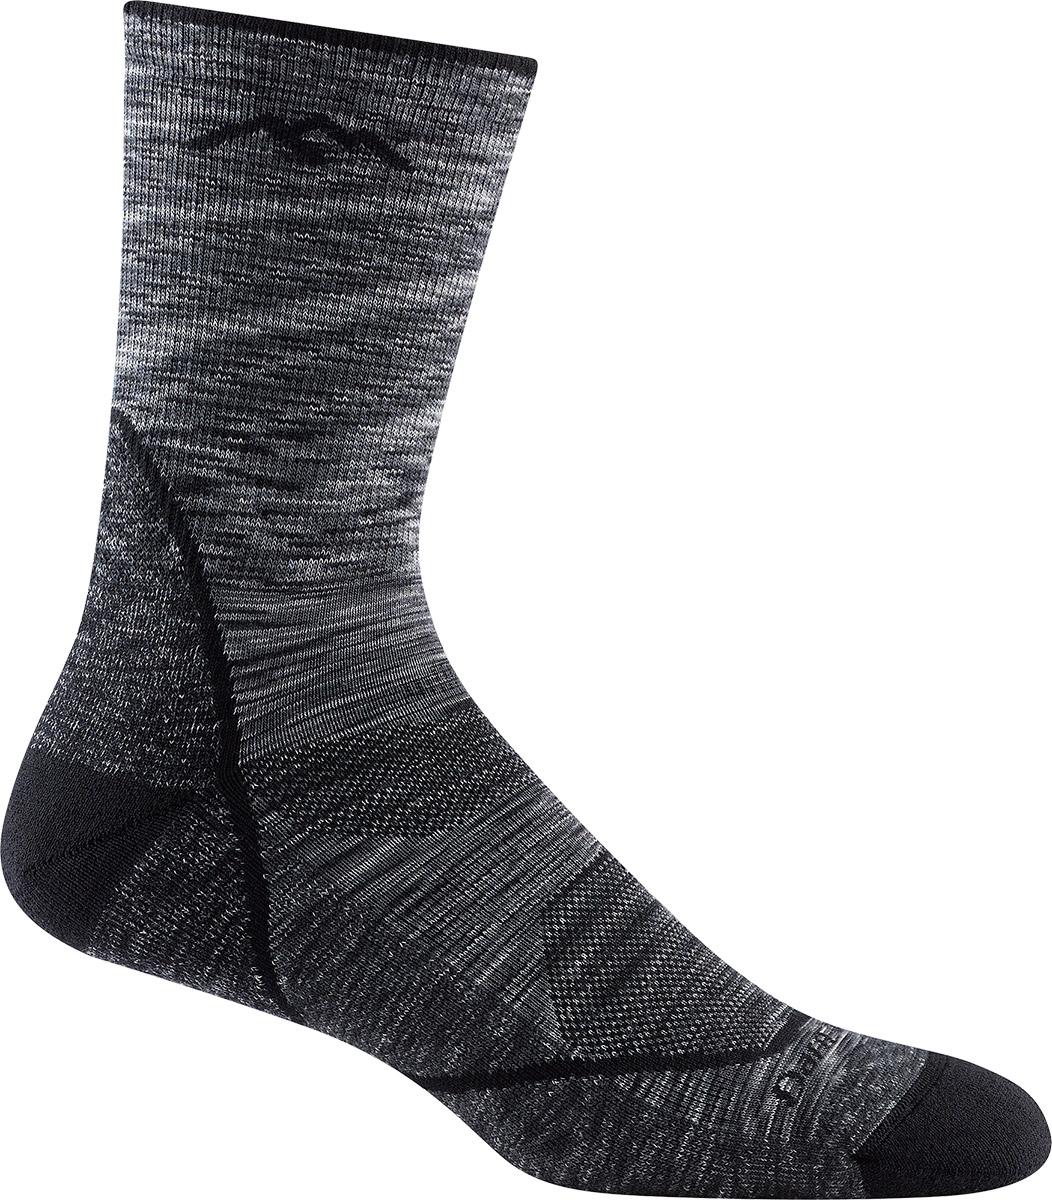 Image of Chaussettes Darn Tough Light Hiker Micro Light Cushion - Space Grey